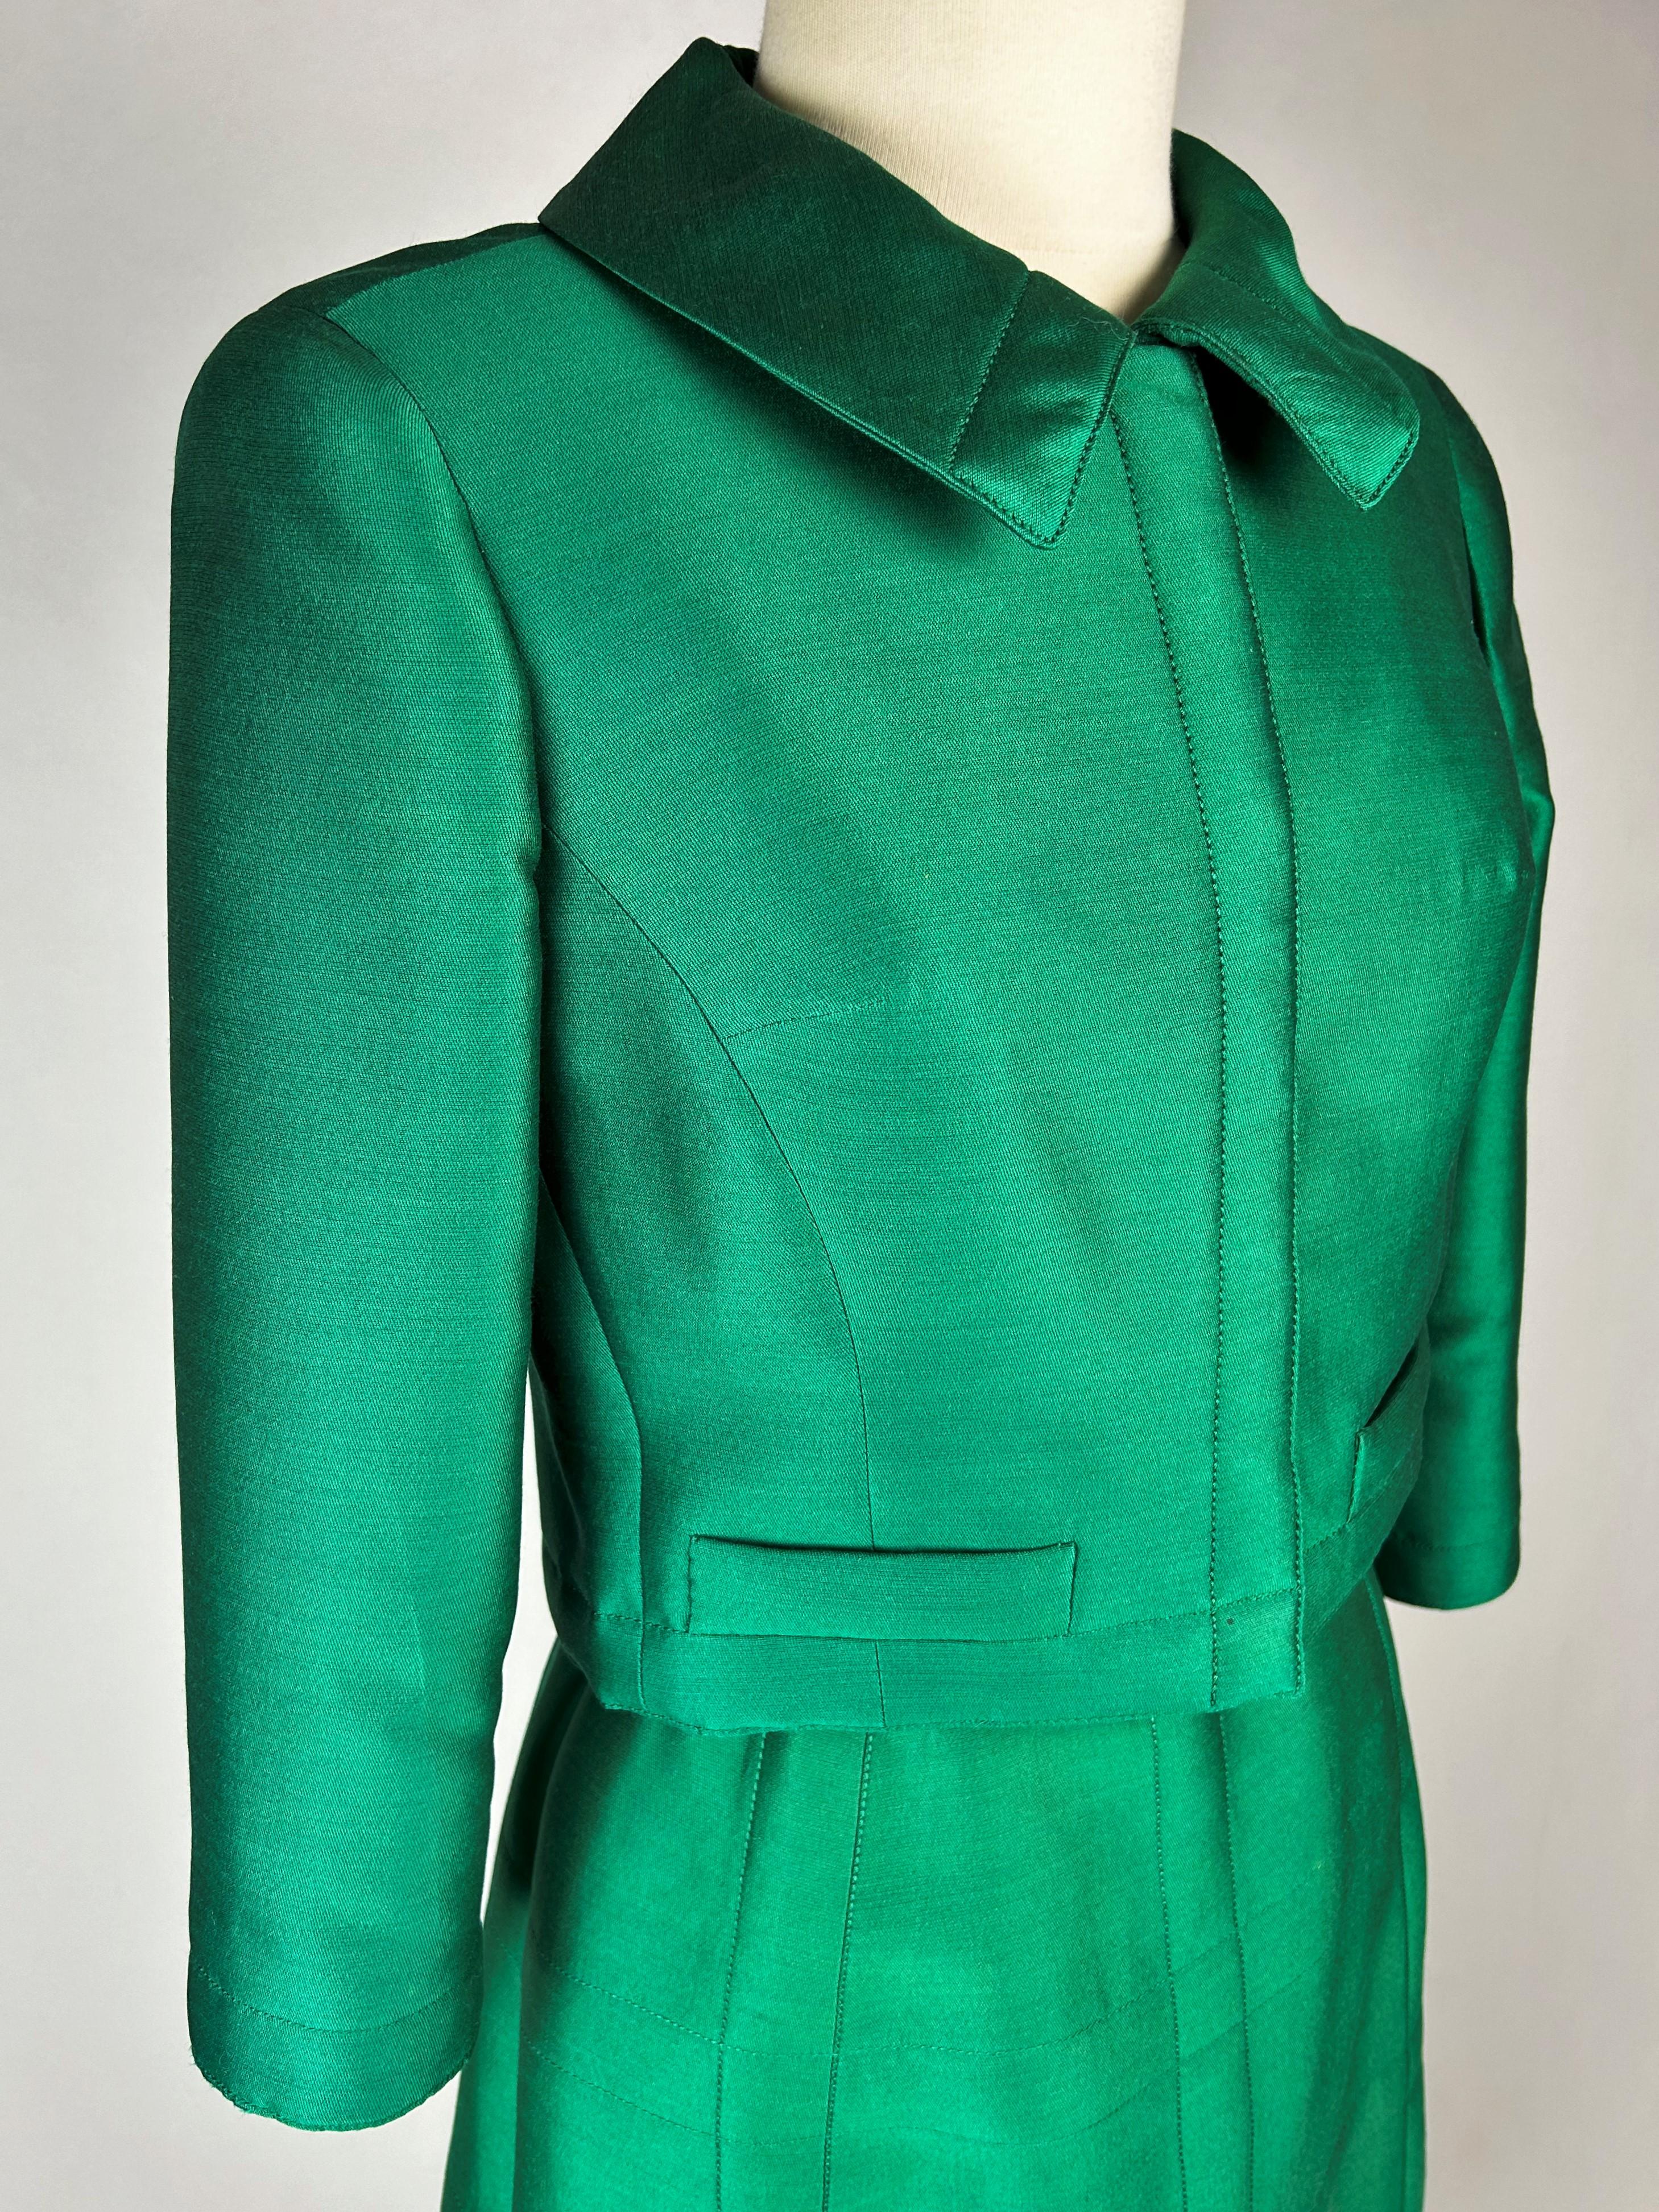 Circa 1968-1972

France

Elegant Demi-Couture skirt suit in emerald green gazar by Louis Féraud (special authorization Paris executed by Gabardin) dating from the late 1960s. Bolero jacket, straight cut with folded Claudine collar and three-quarter